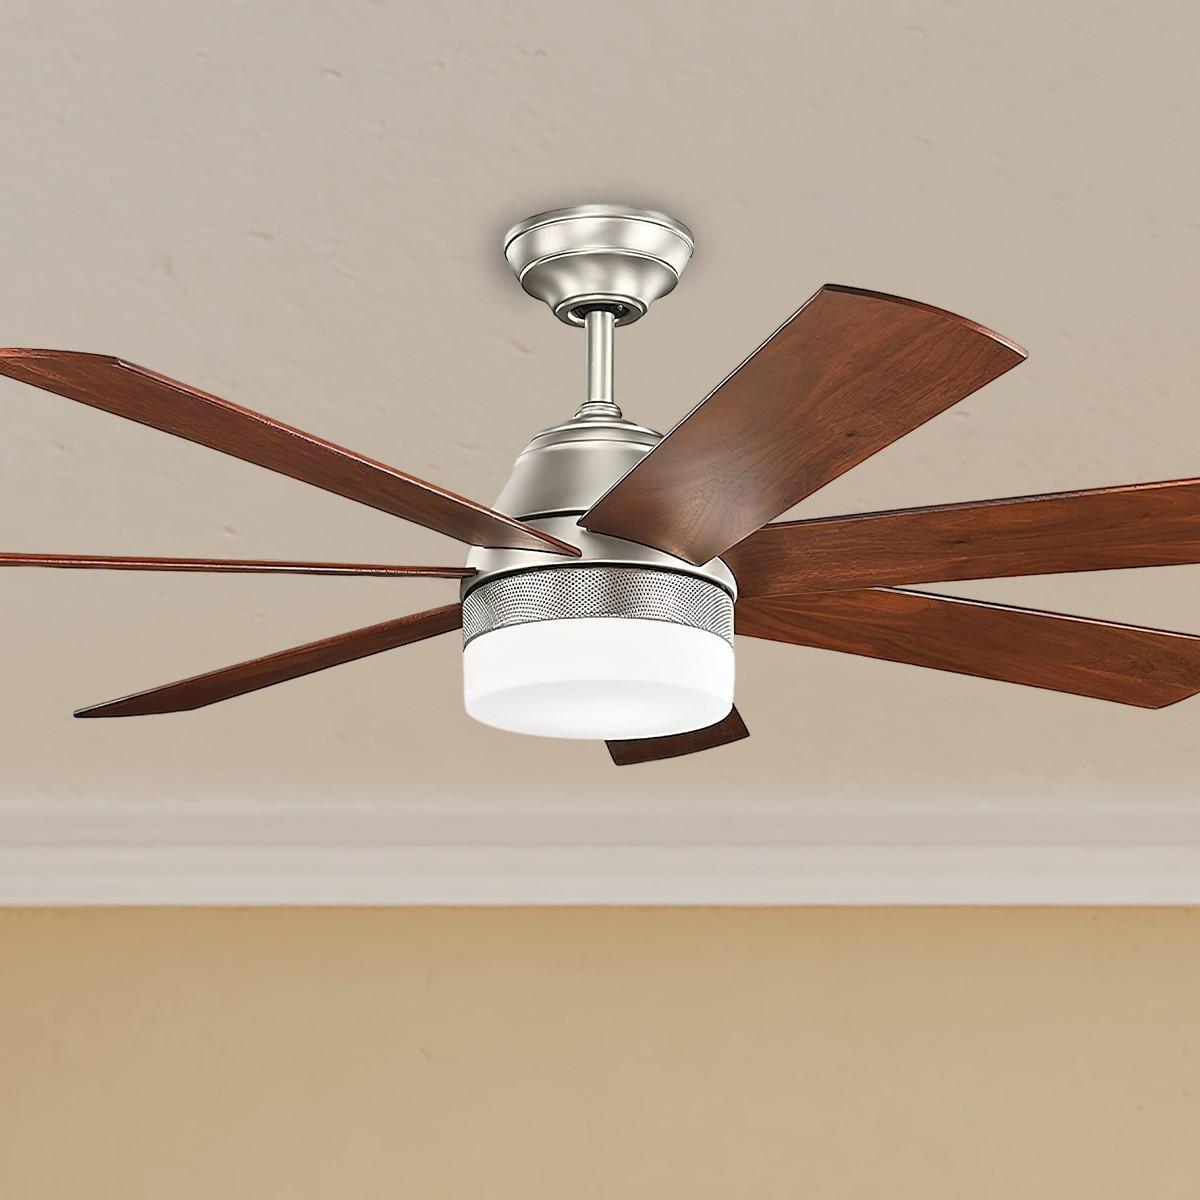 Kichler Ellys 56 Inch Modern Windmill Ceiling Fan With Light Brushed Nickel Finish Wall Control Included Bees Lighting